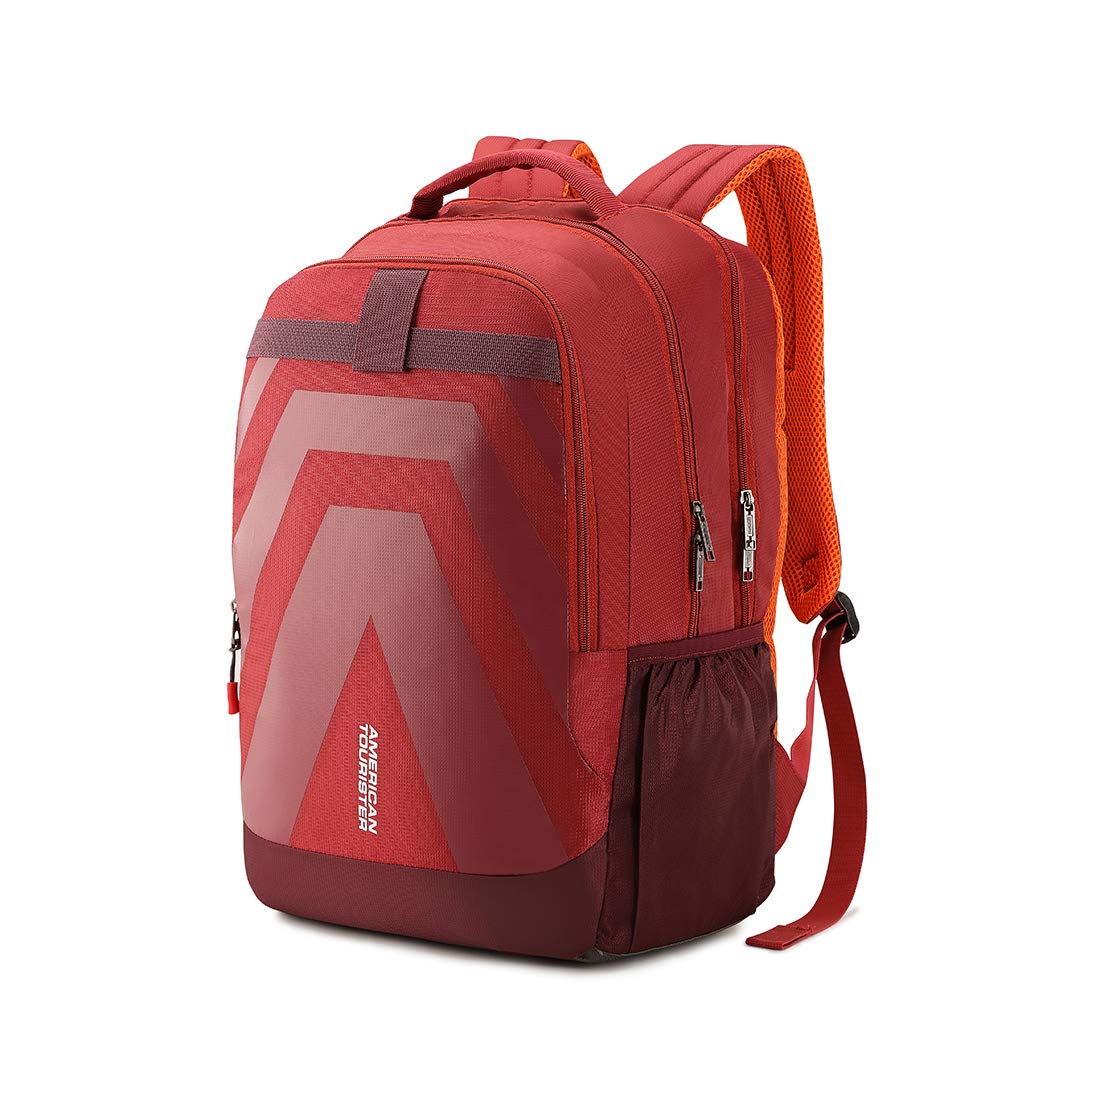 American Tourister Jet 34 Ltrs Red Casual Backpack (FE0 (0) 00 004)